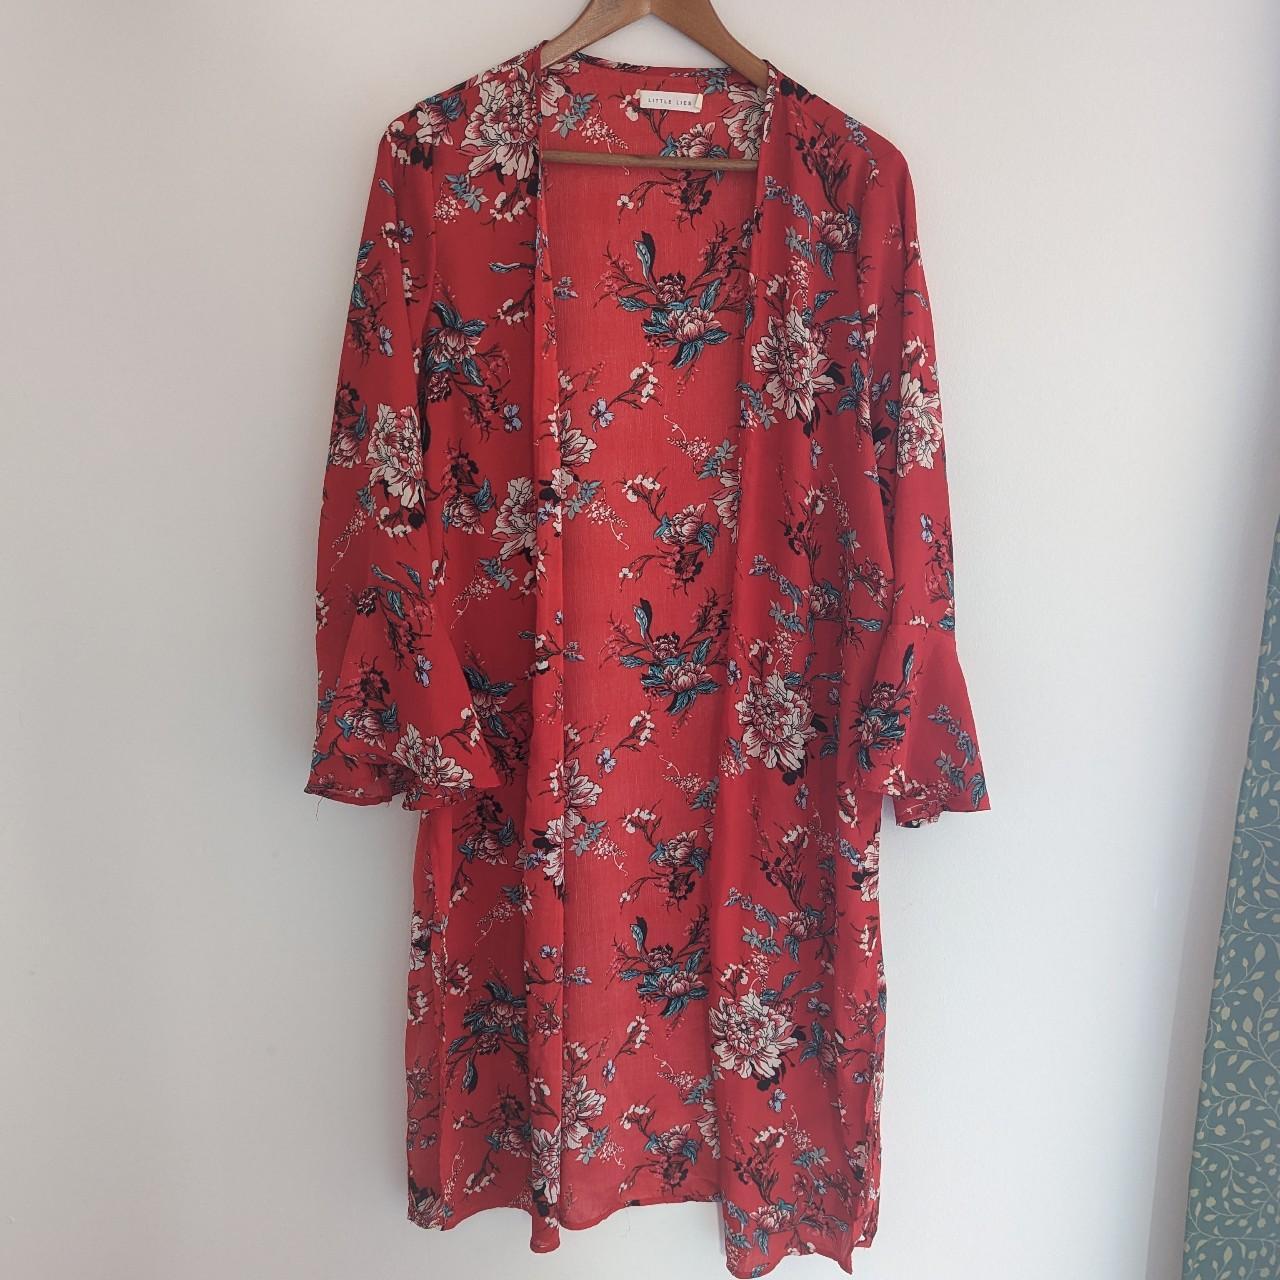 Witchy duster / cover up Little Lies size M Flowy,... - Depop